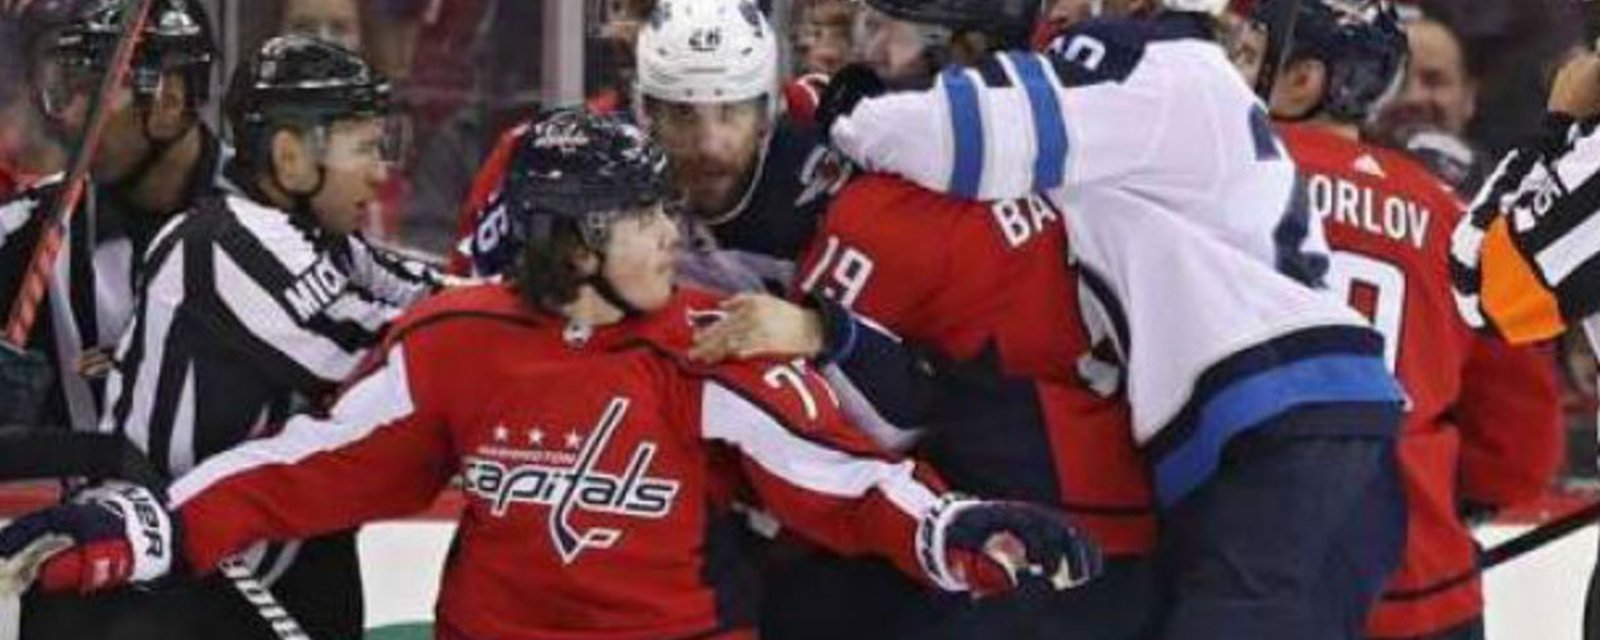 Oshie protects rival Chariot's head during line brawl